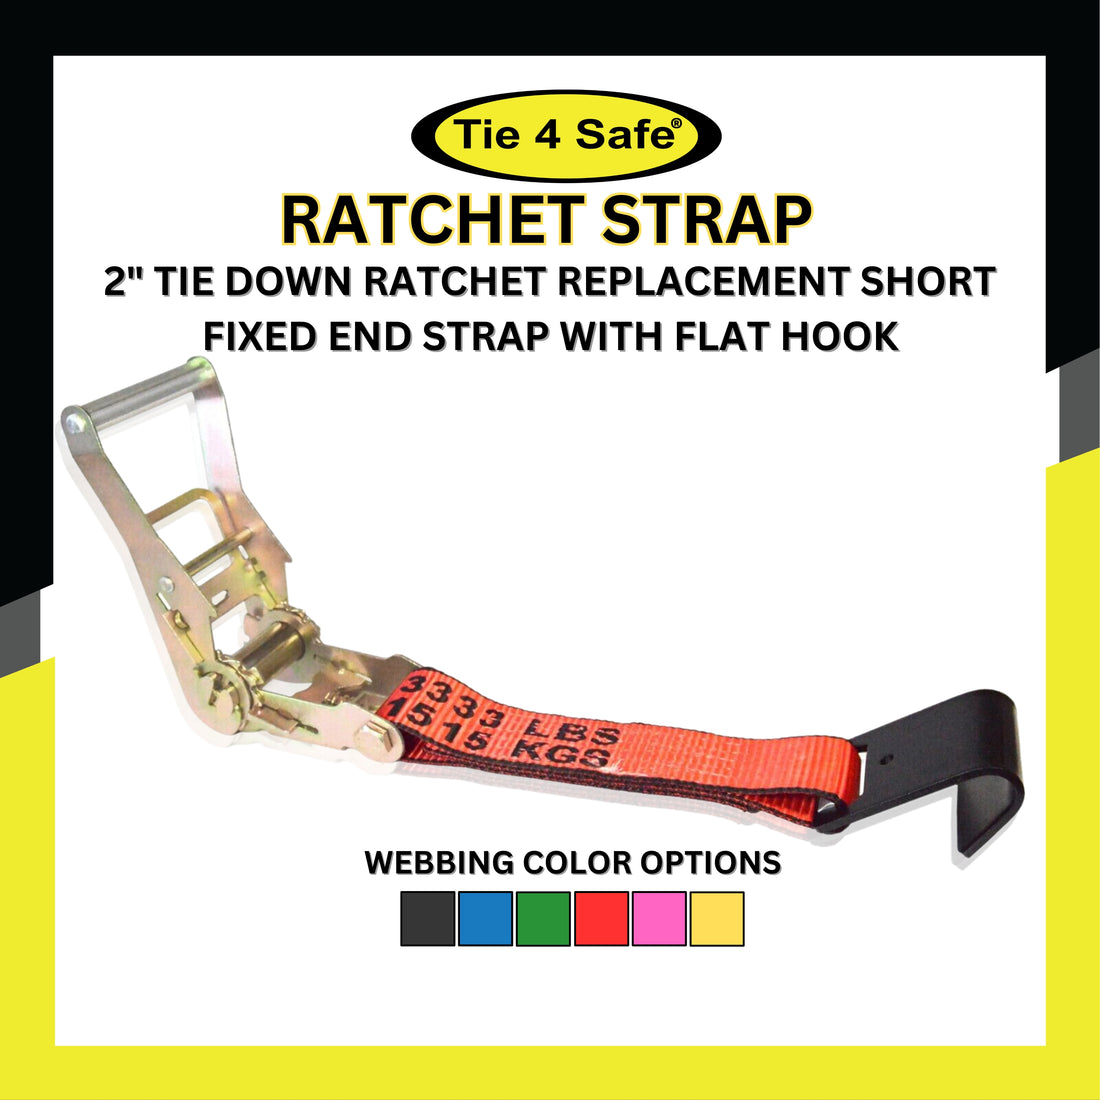 USA 2" Tie Down Ratchet Replacement Short Fixed End Strap With Flat Hook